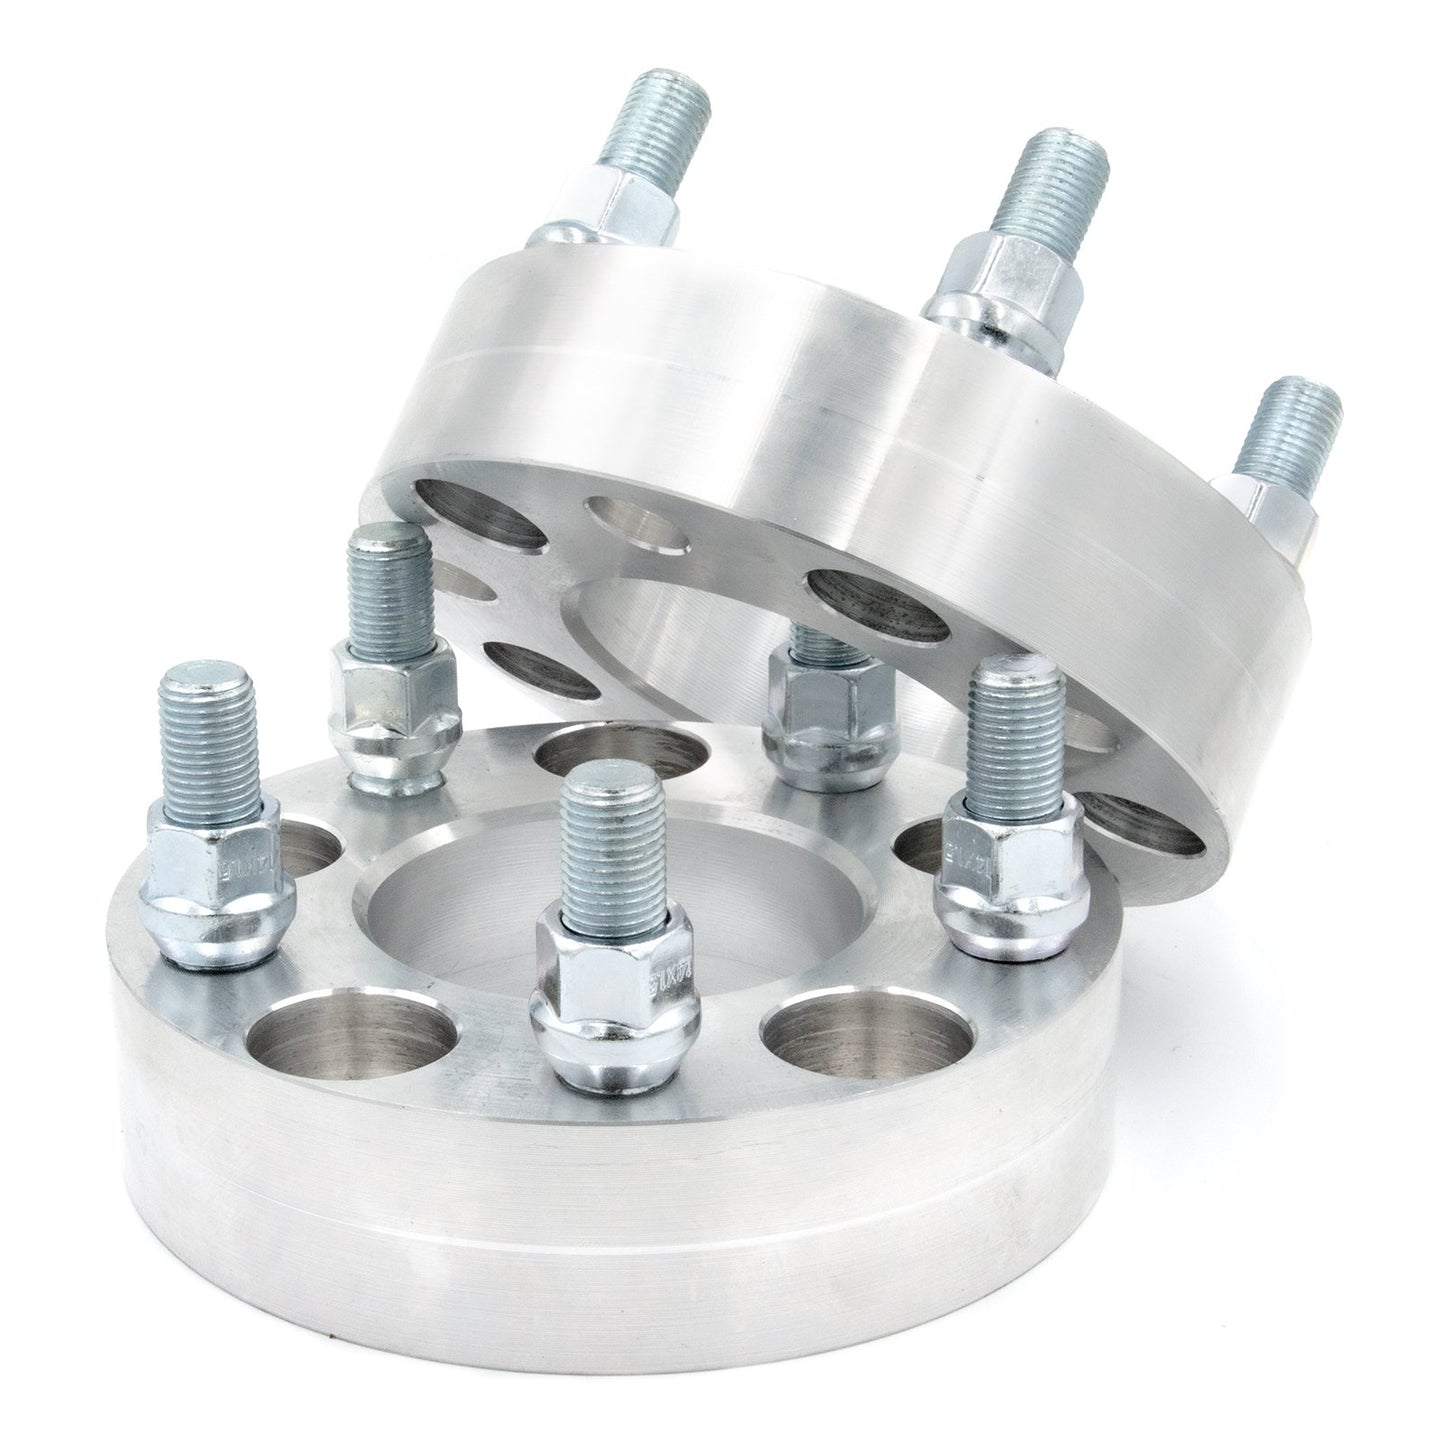 5x110 to 5x105 Wheel Spacer/Adapter - Thickness: 3/4"- 4"